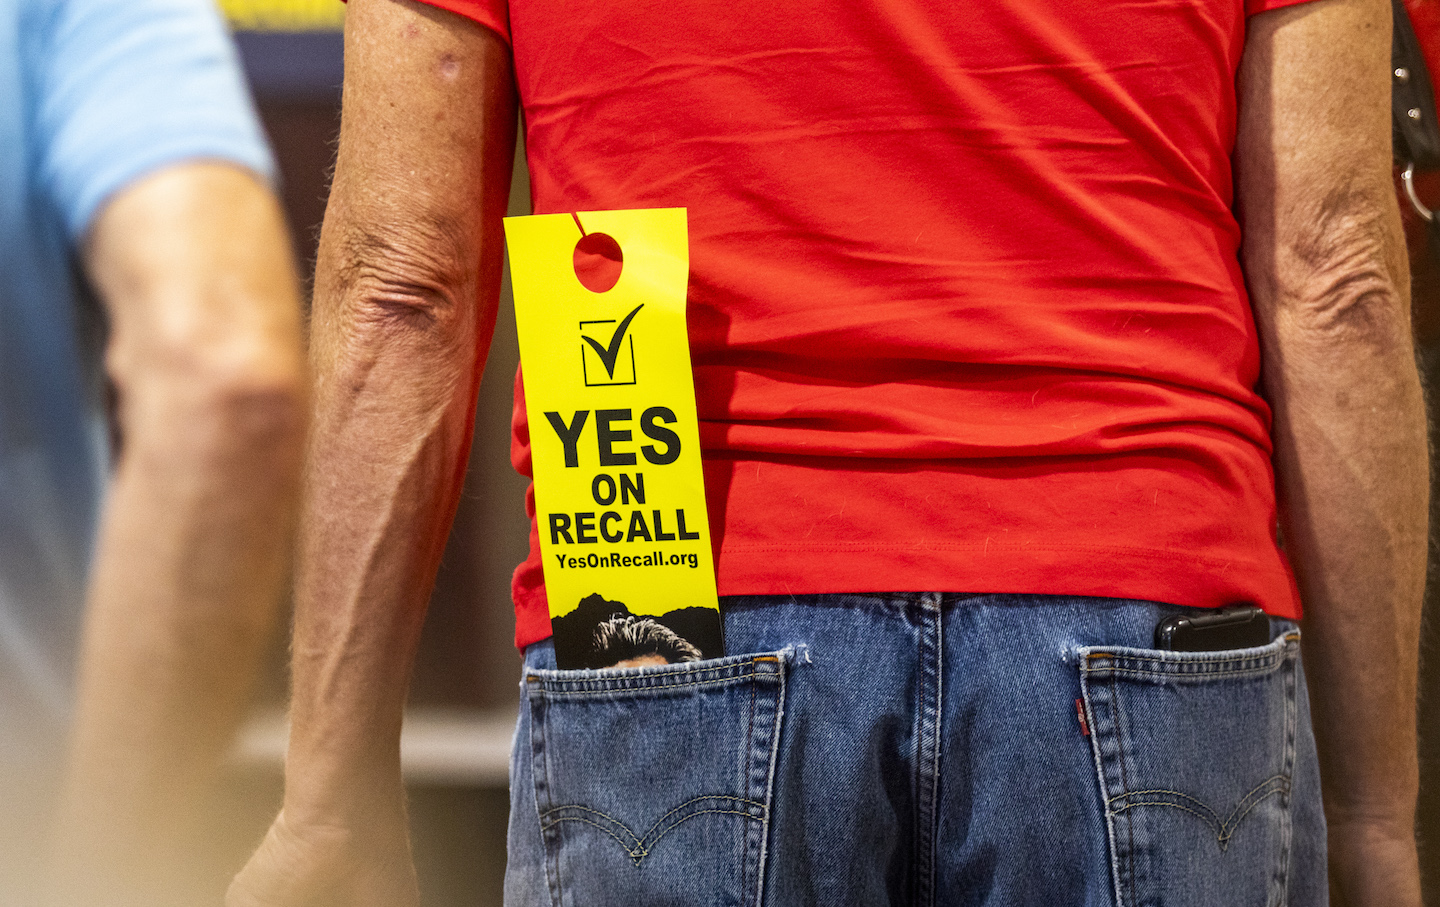 SANTA CLARITA - Yes on Recall campaign Chairman Carl DeMaio is scheduled to attend a rally in support of the recall against Gov. Gavin Newsom at the Santa Clarita Activities Center. The stop will mark the third and final stop in a two-day tour in su